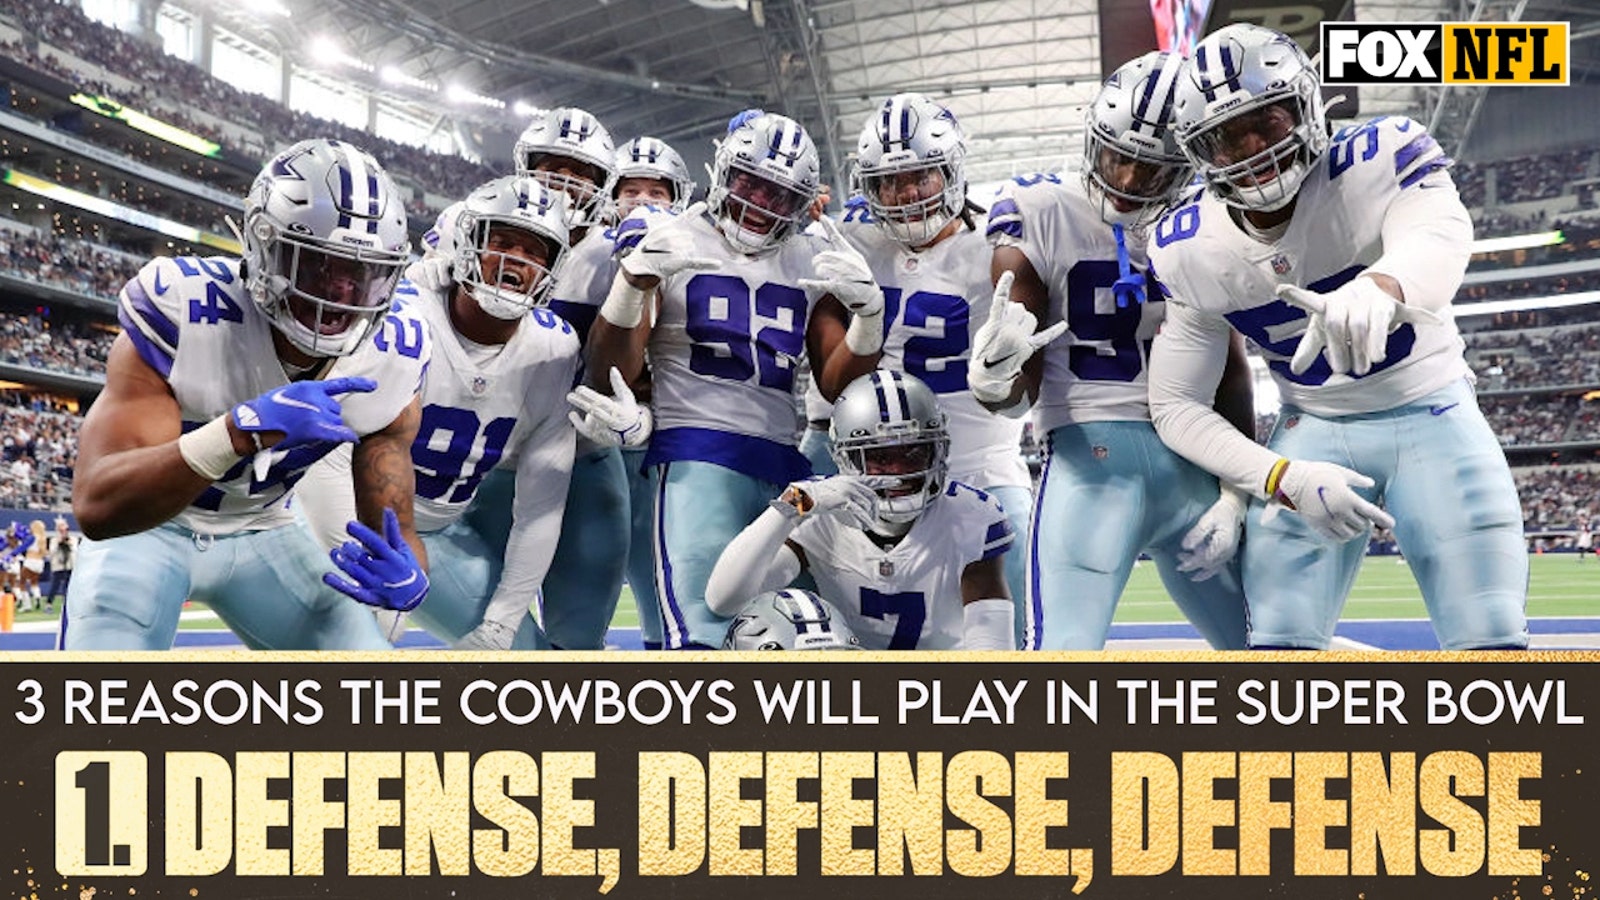 Three reasons the Cowboys will play in the Super Bowl